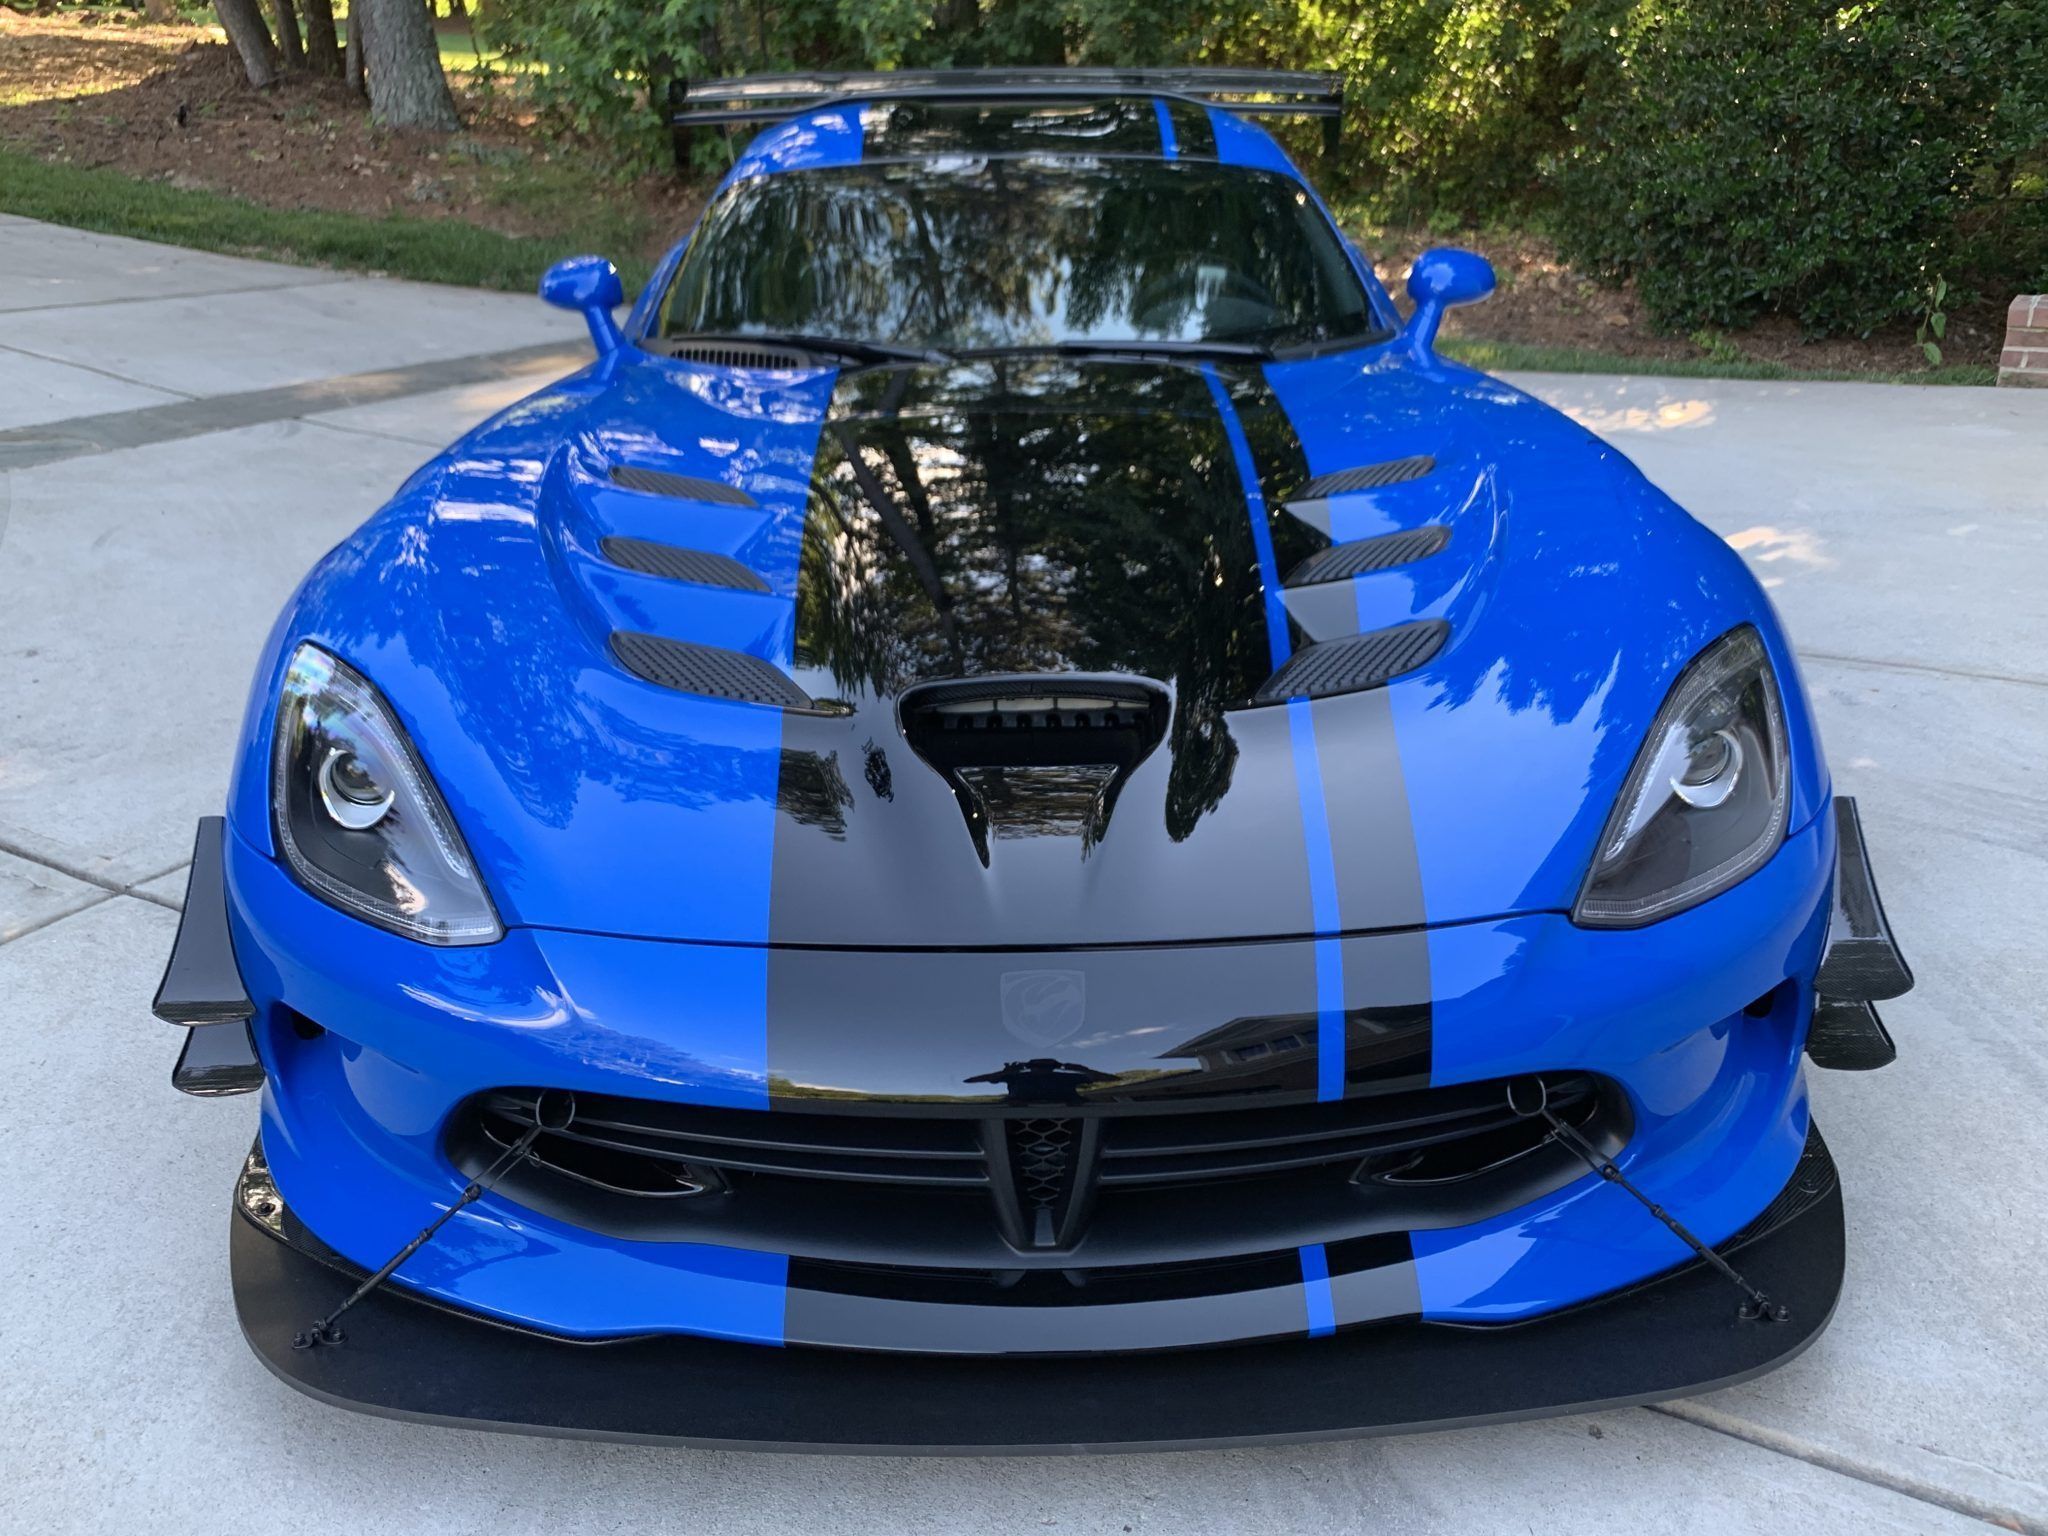 Here's Why We'd Buy The Dodge Viper ACR Over A Corvette C8 Any Day (1 Reason Why We Won't)